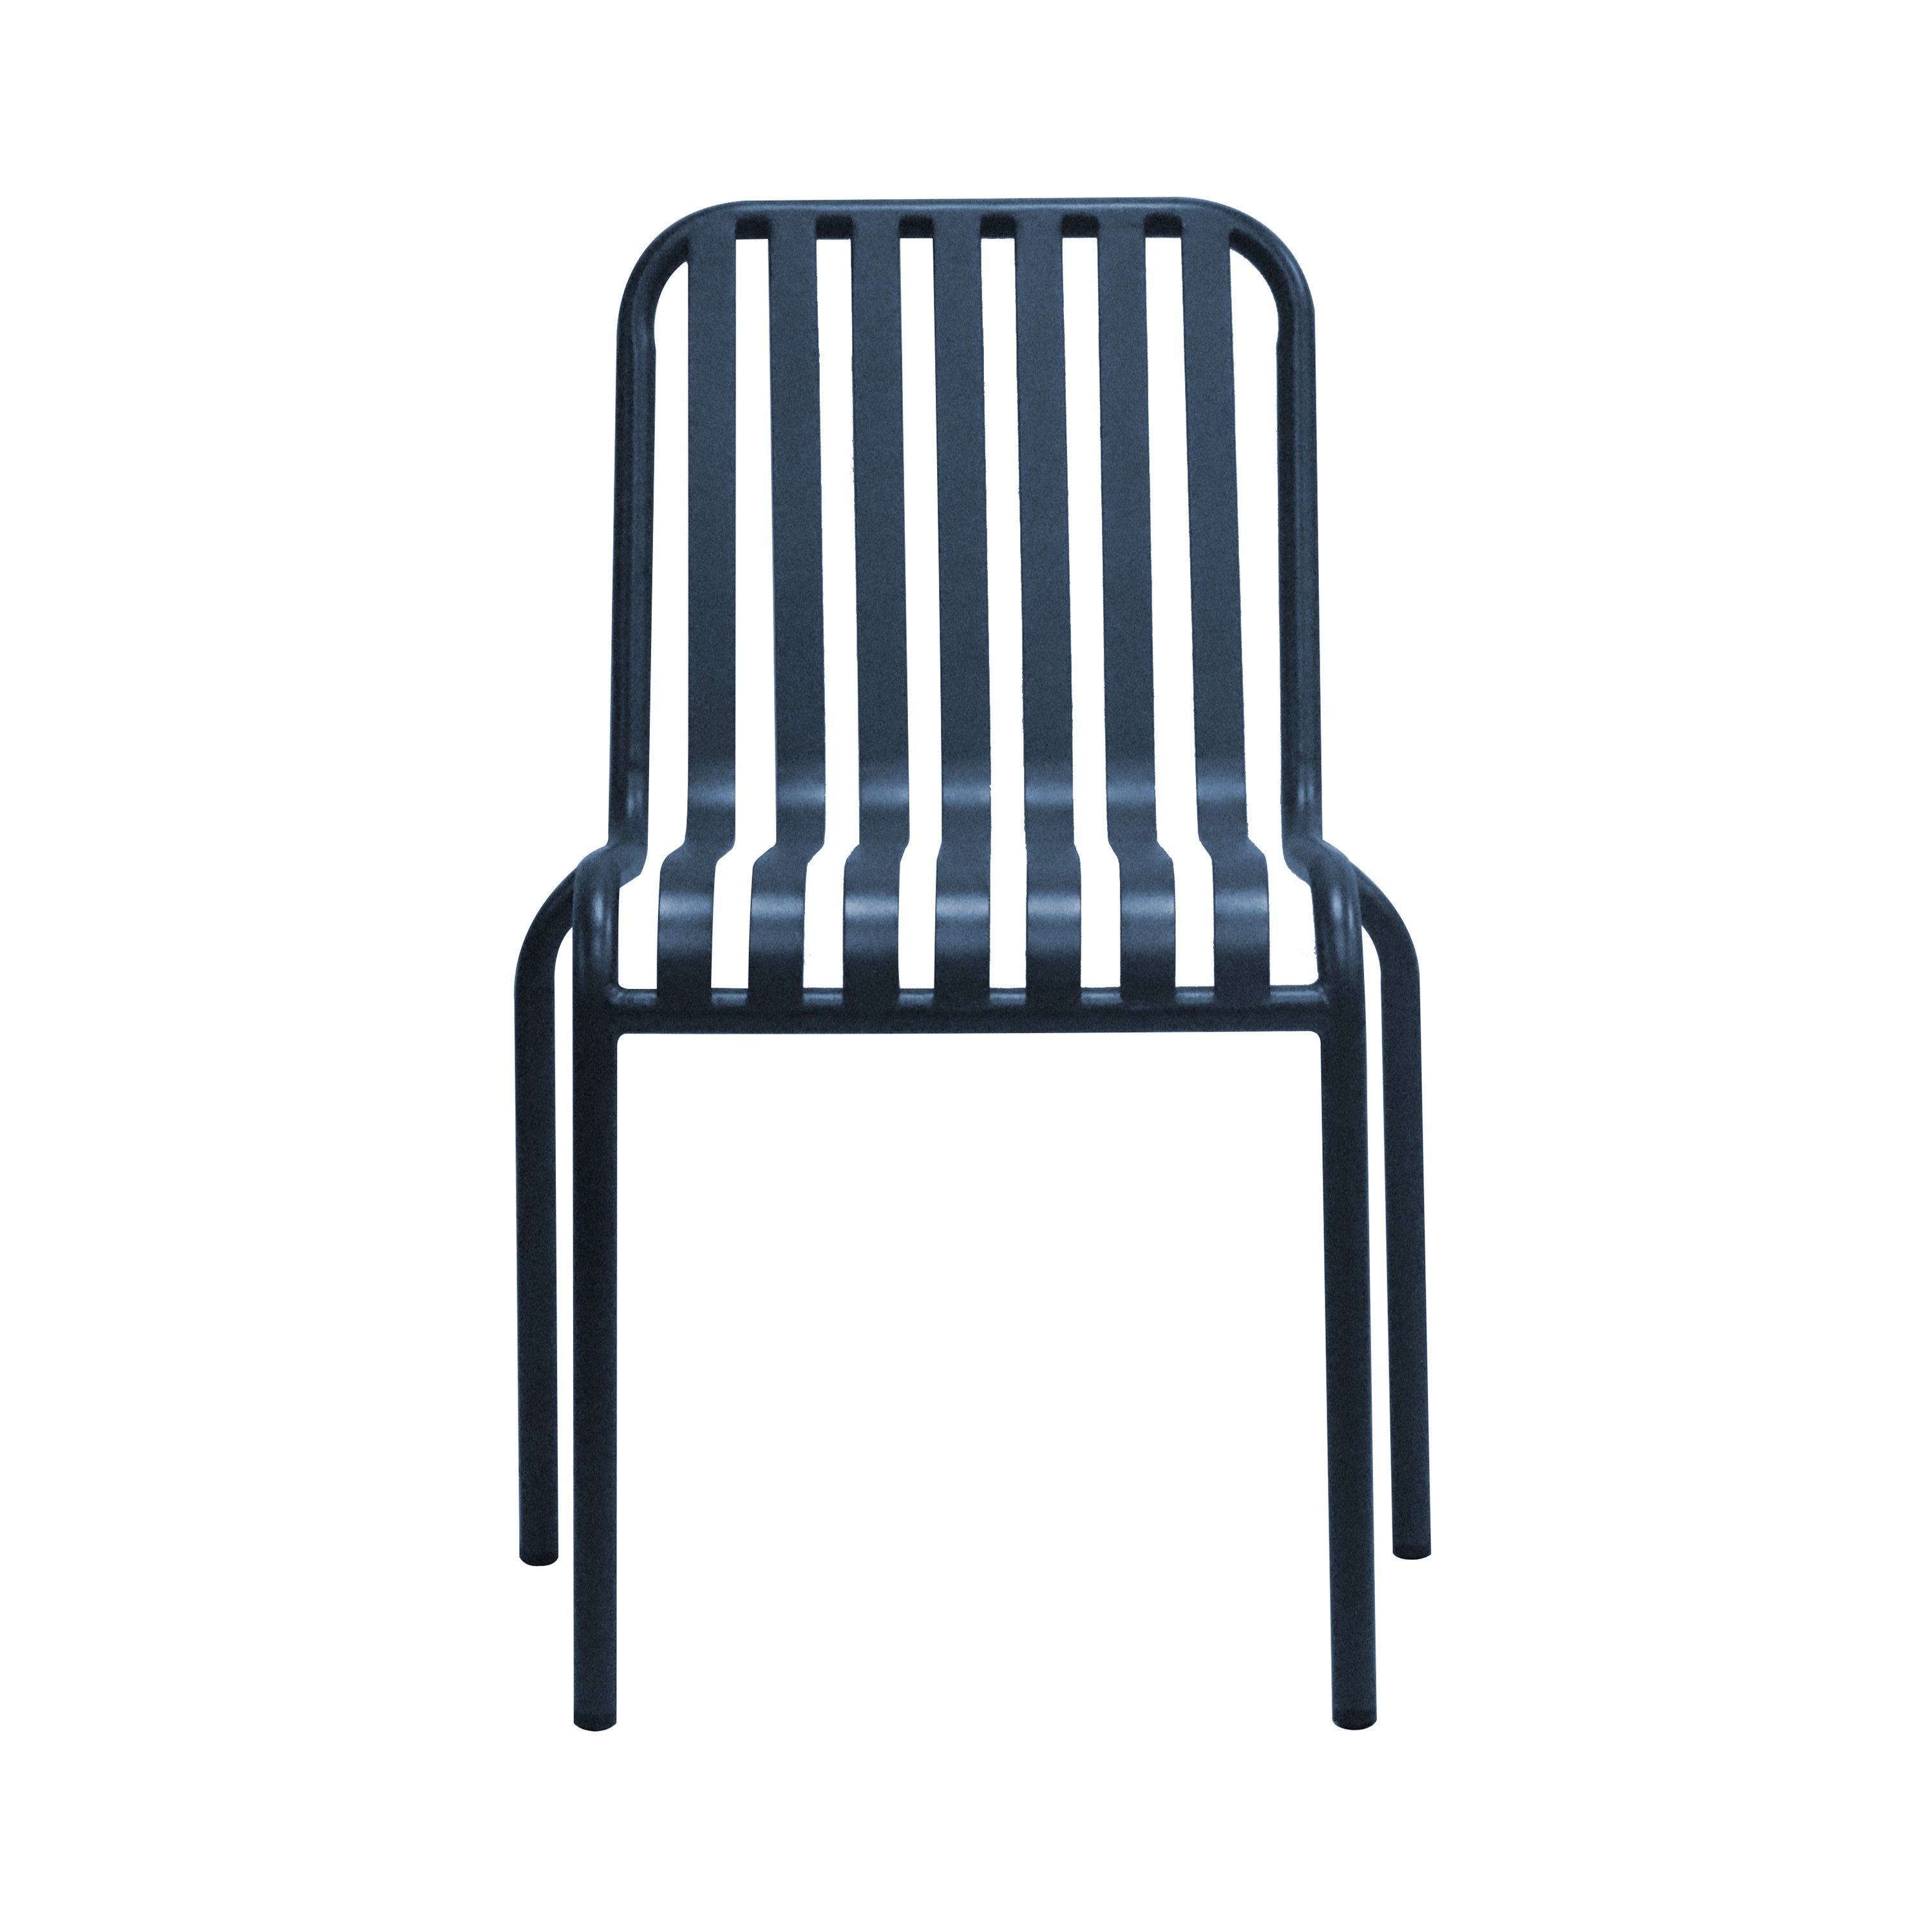 Euro Style Dining Chairs - Enid Outdoor Side Chair in Dark Blue - Set of 2